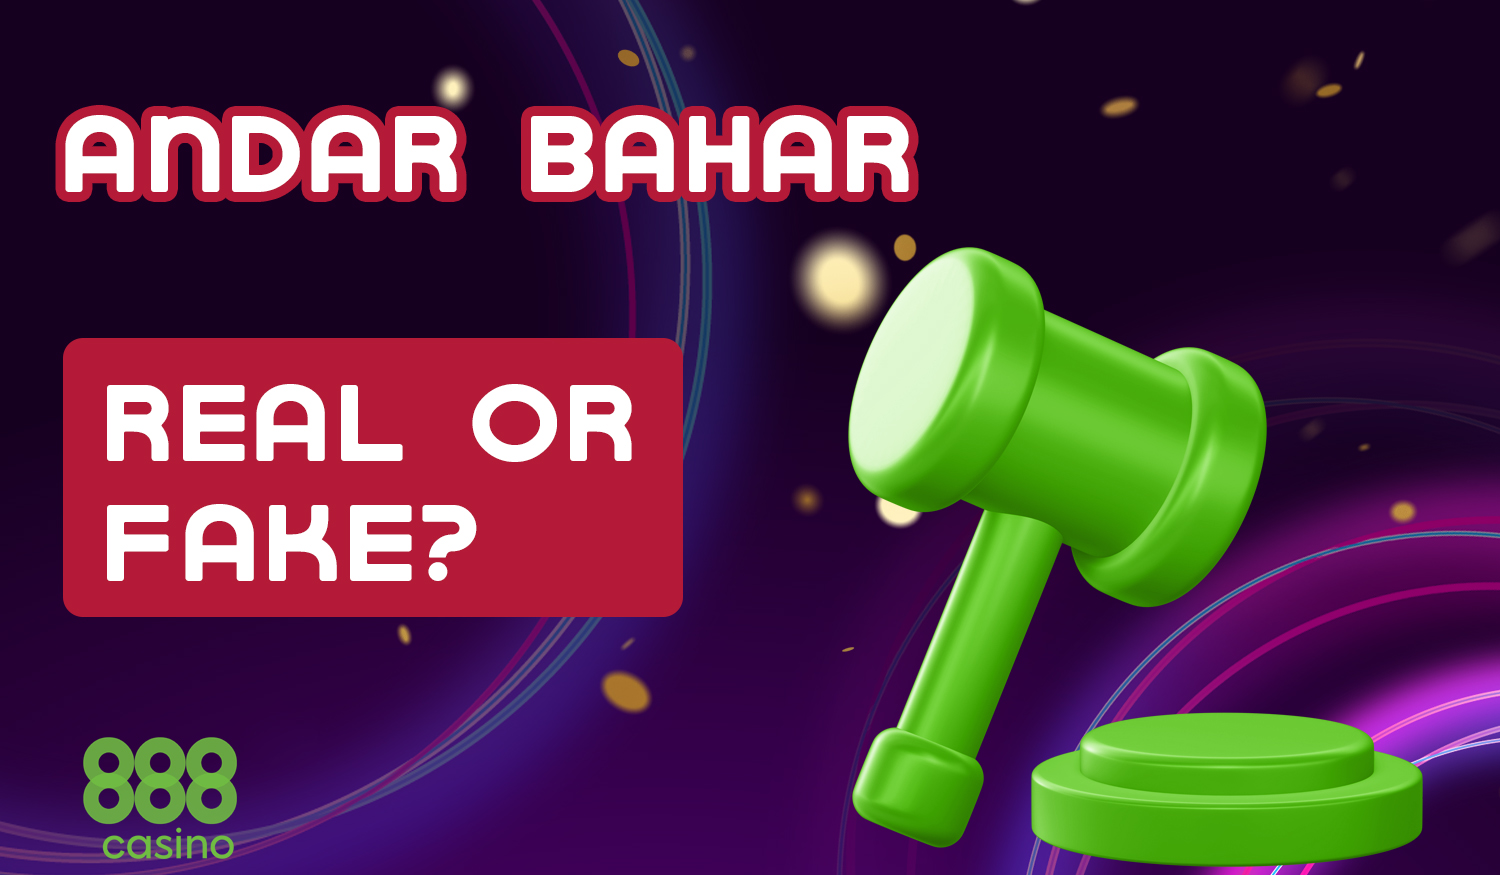 Is it legal to play at Andar Bahar at 888 casino for Indian users?